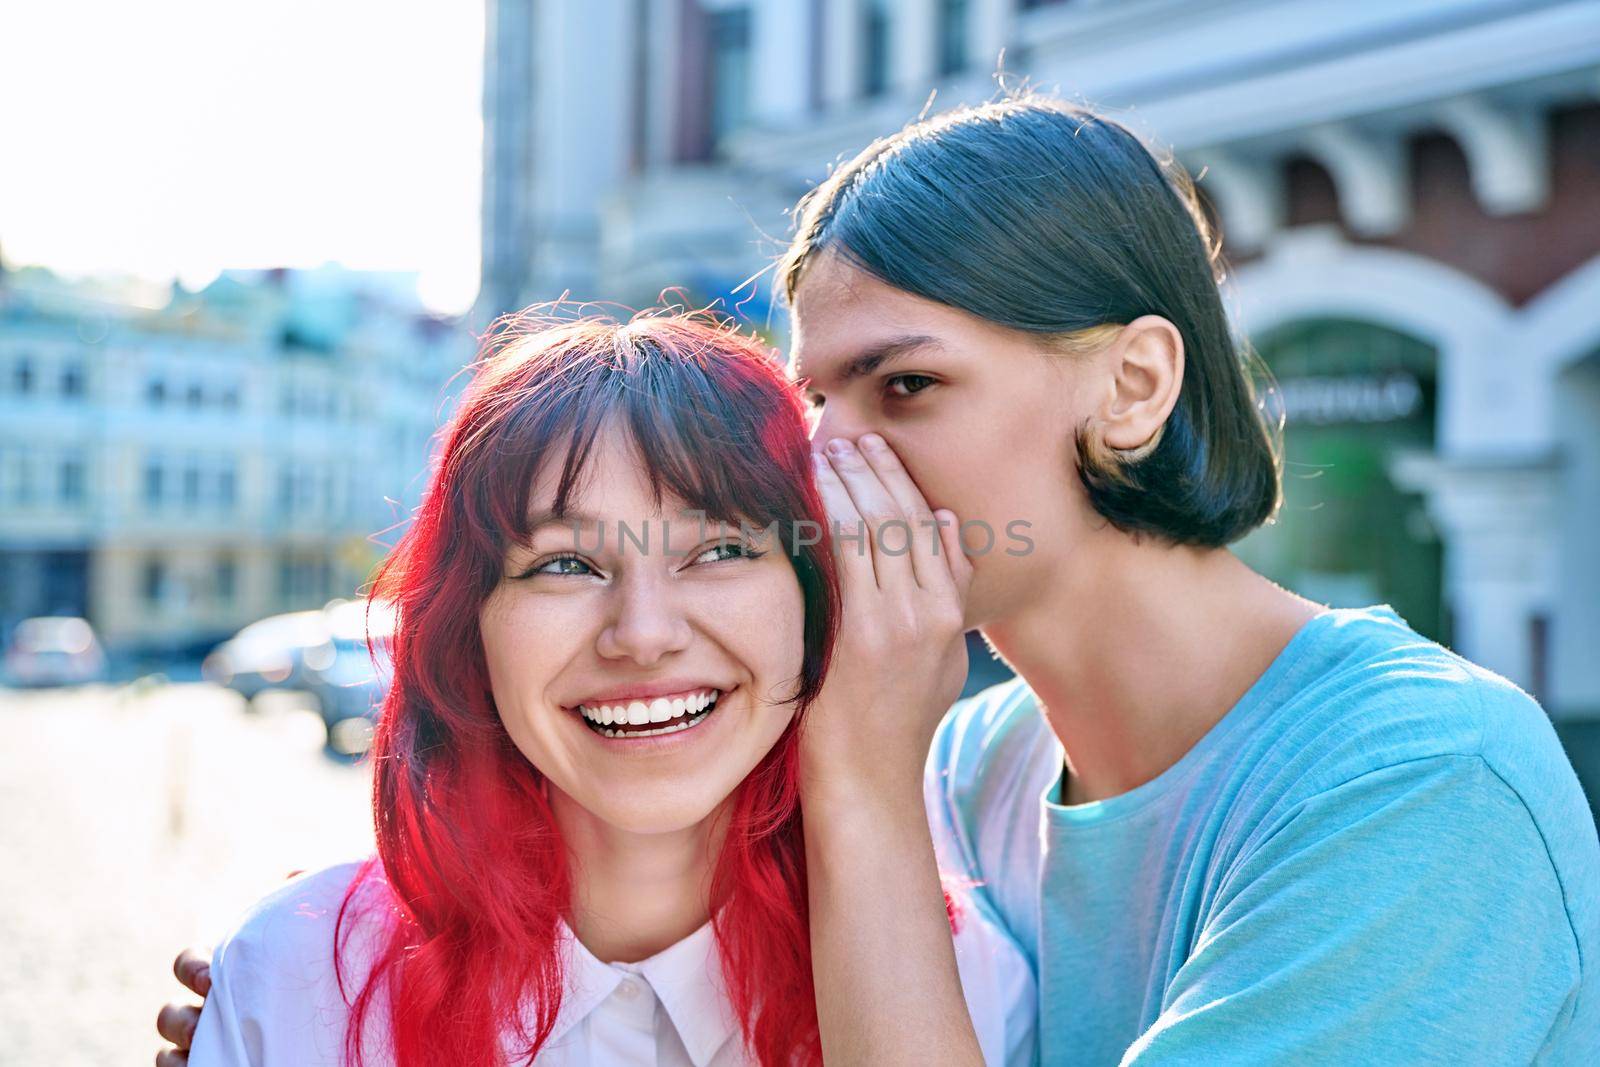 Couple of teenage students friends, guy whispers secret in ear of girlfriend on summer city street. Adolescence, friendship, relationships, surprise, emotions, youth concept